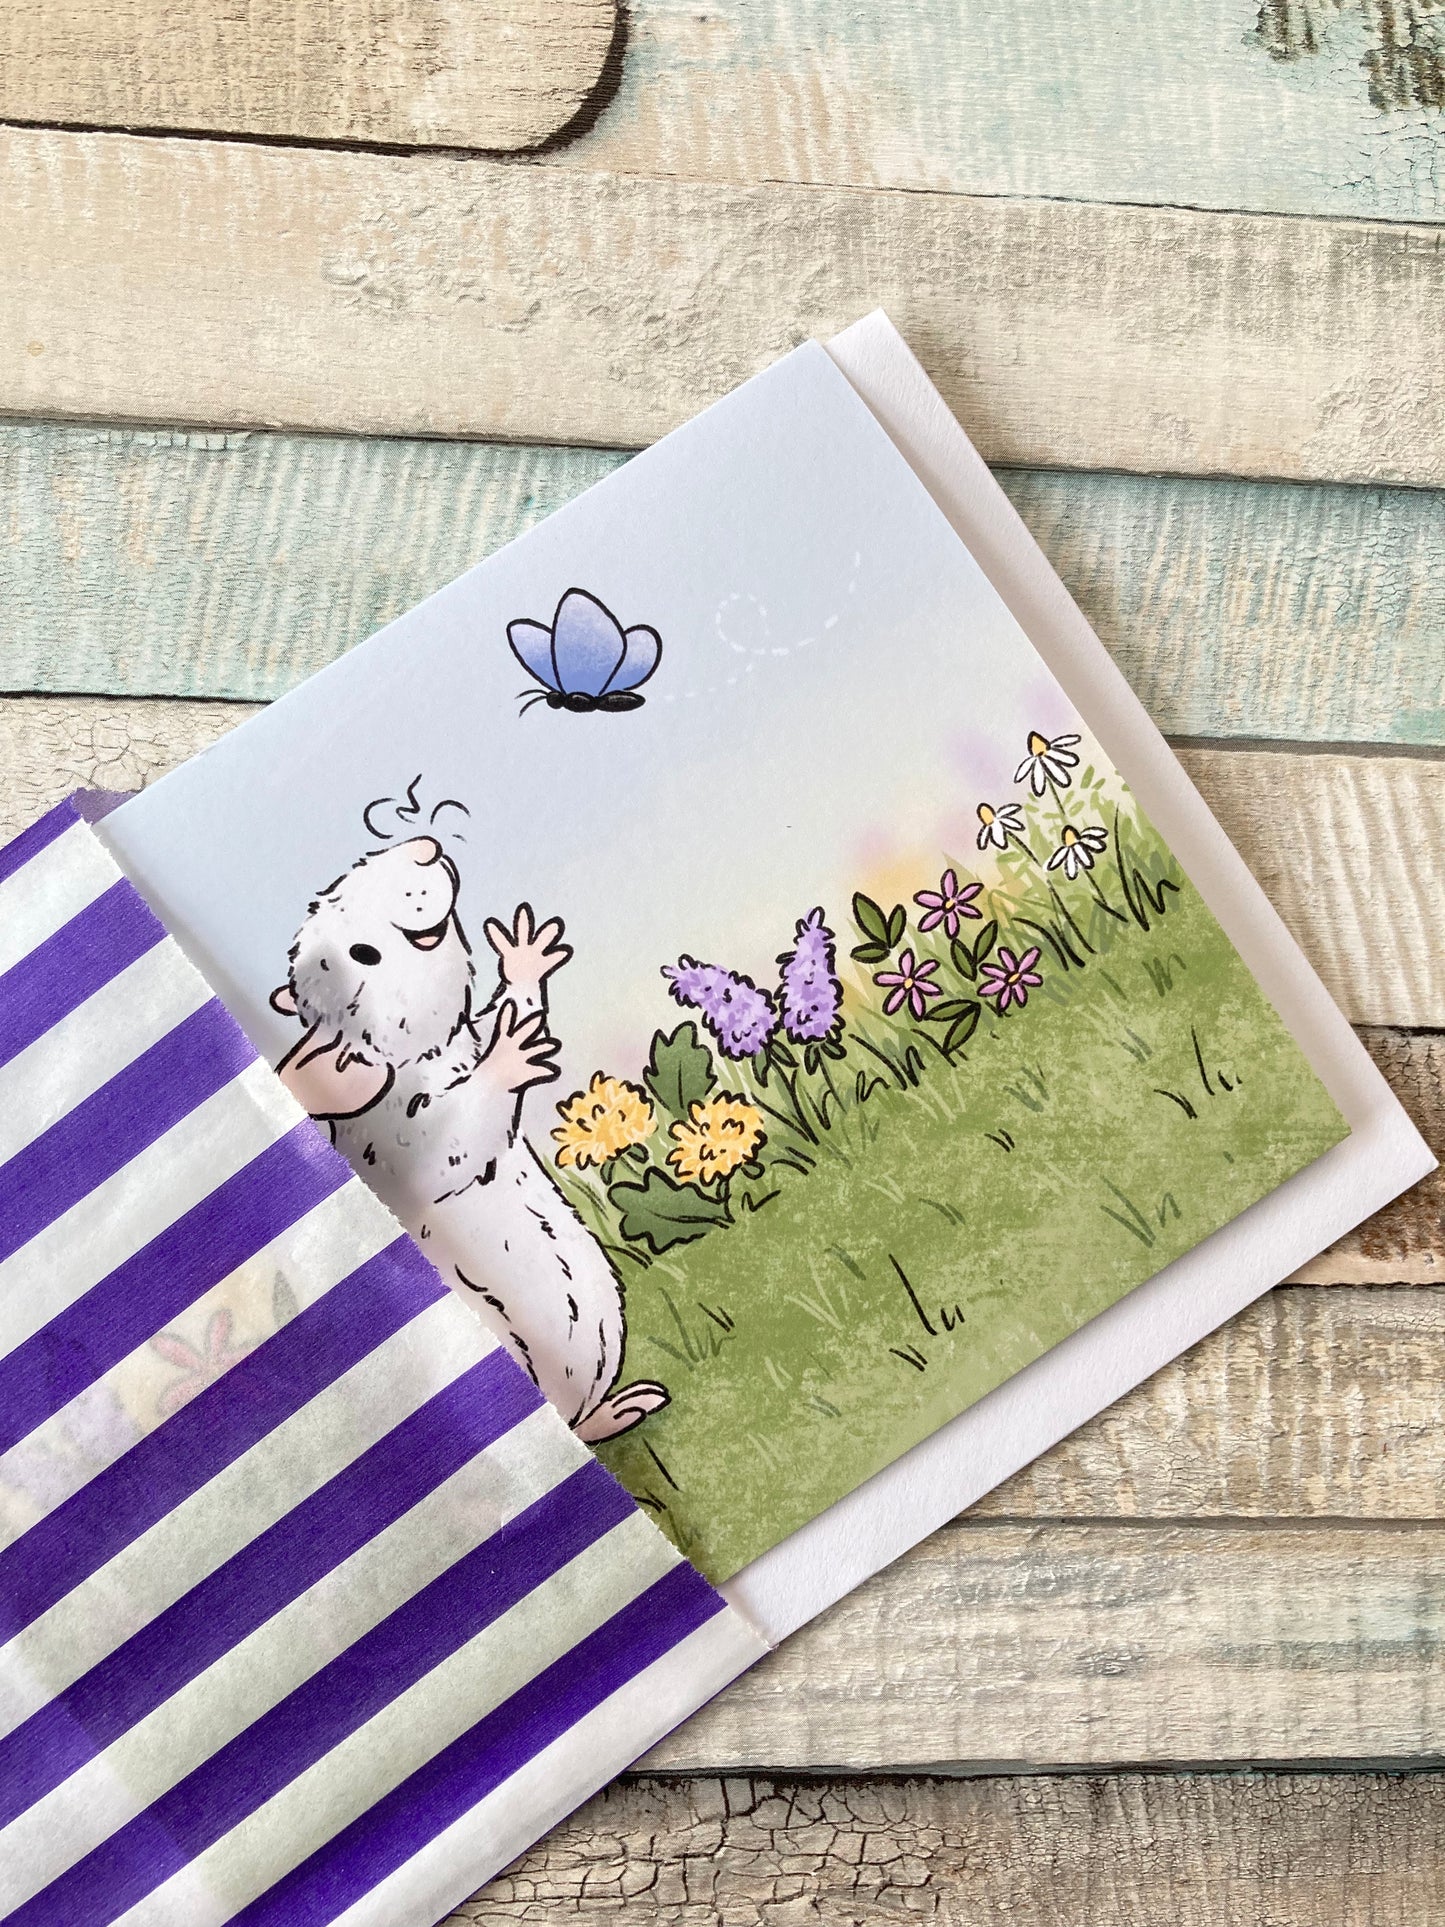 Spring Ratty A6 Blank Greeting Card, Any Occasion, Rat Lover gift, Cute Animal Card